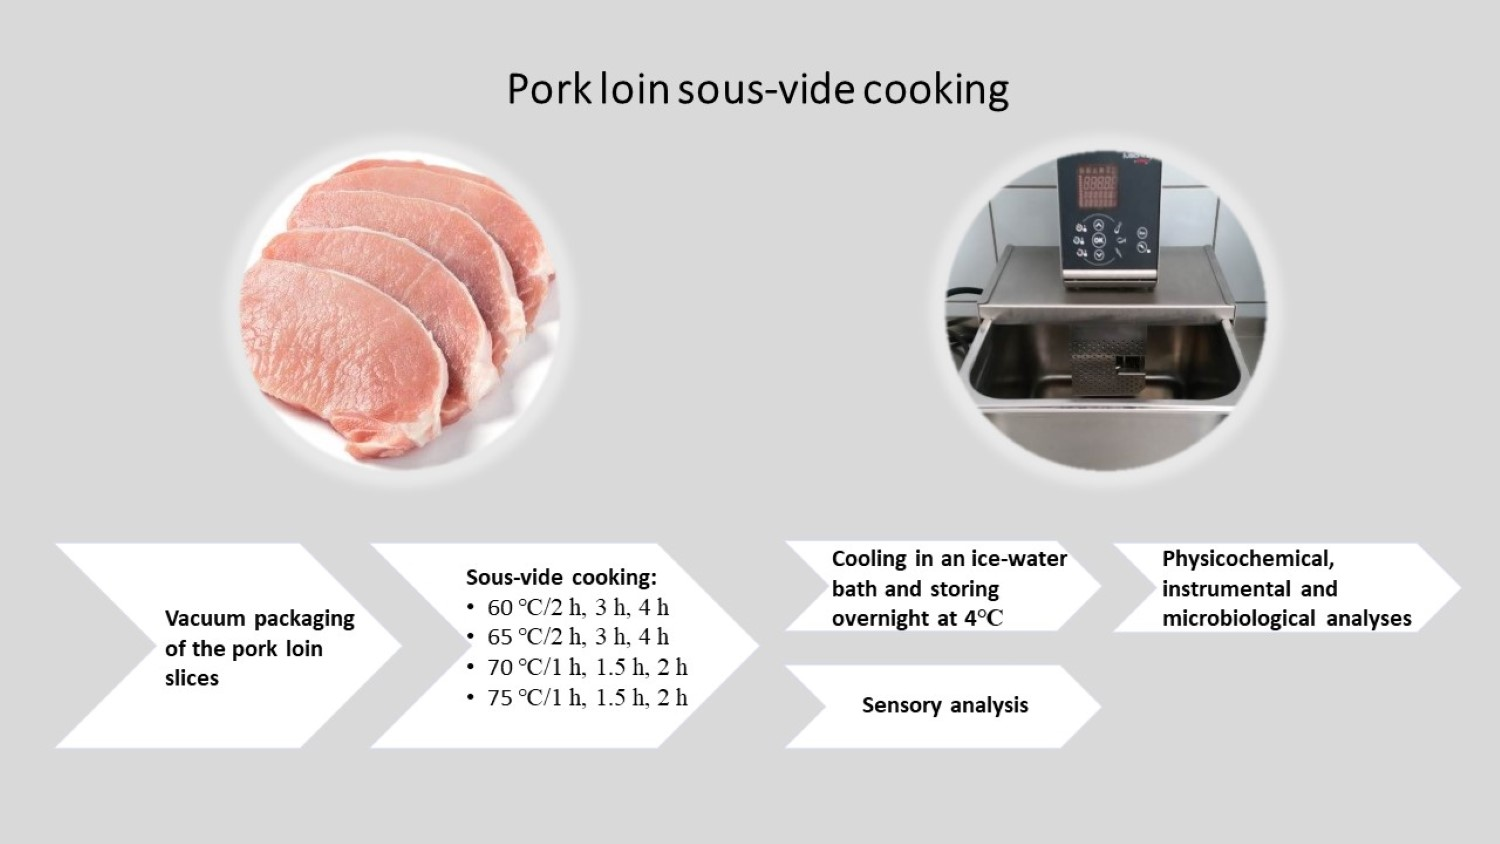 Moisture content, cooking yield and weight loss of the sous-vide